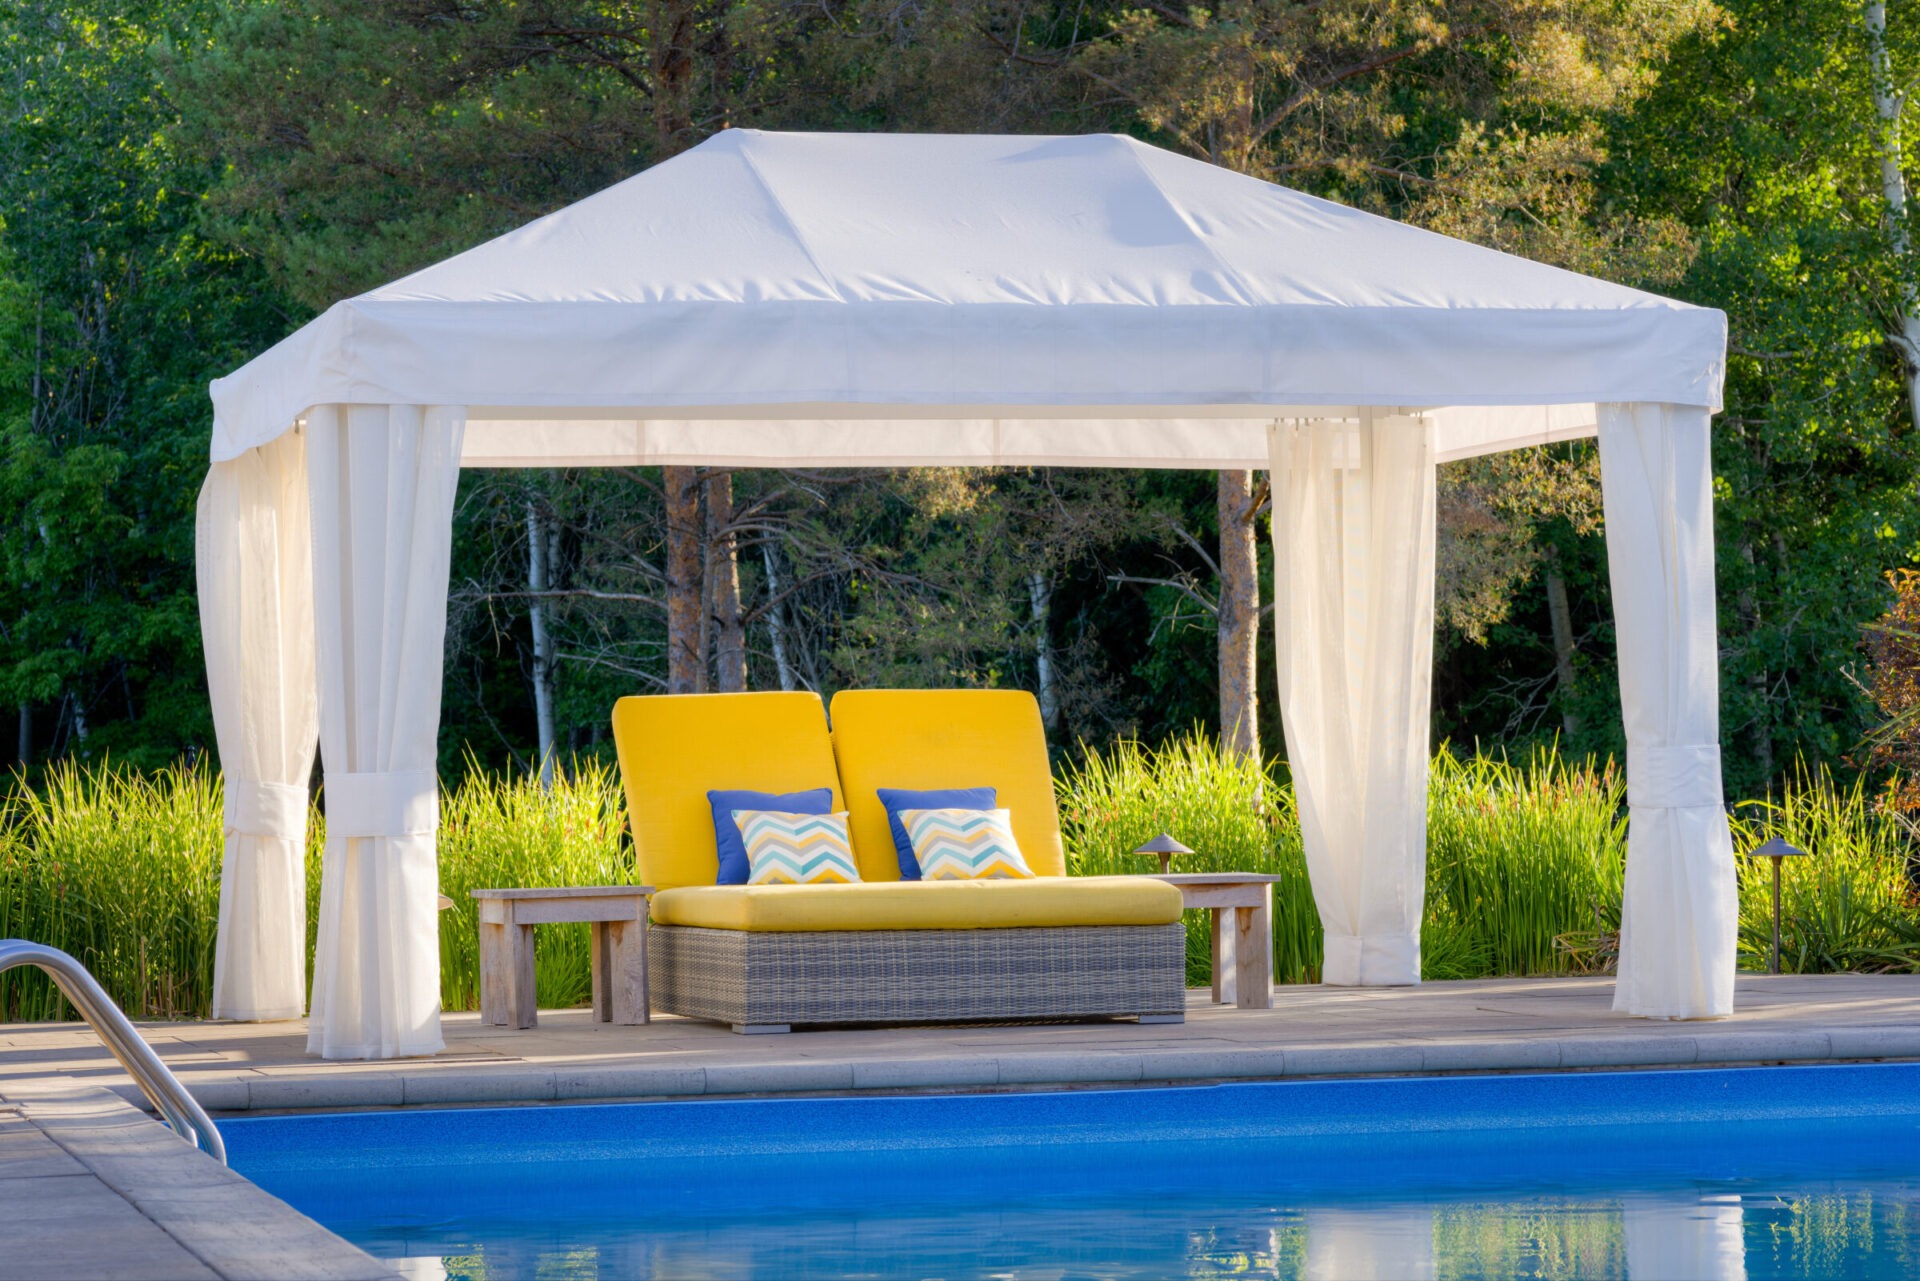 A white poolside gazebo with sheer curtains shelters a wicker loveseat with bright yellow cushions and decorative pillows, beside a tranquil swimming pool.